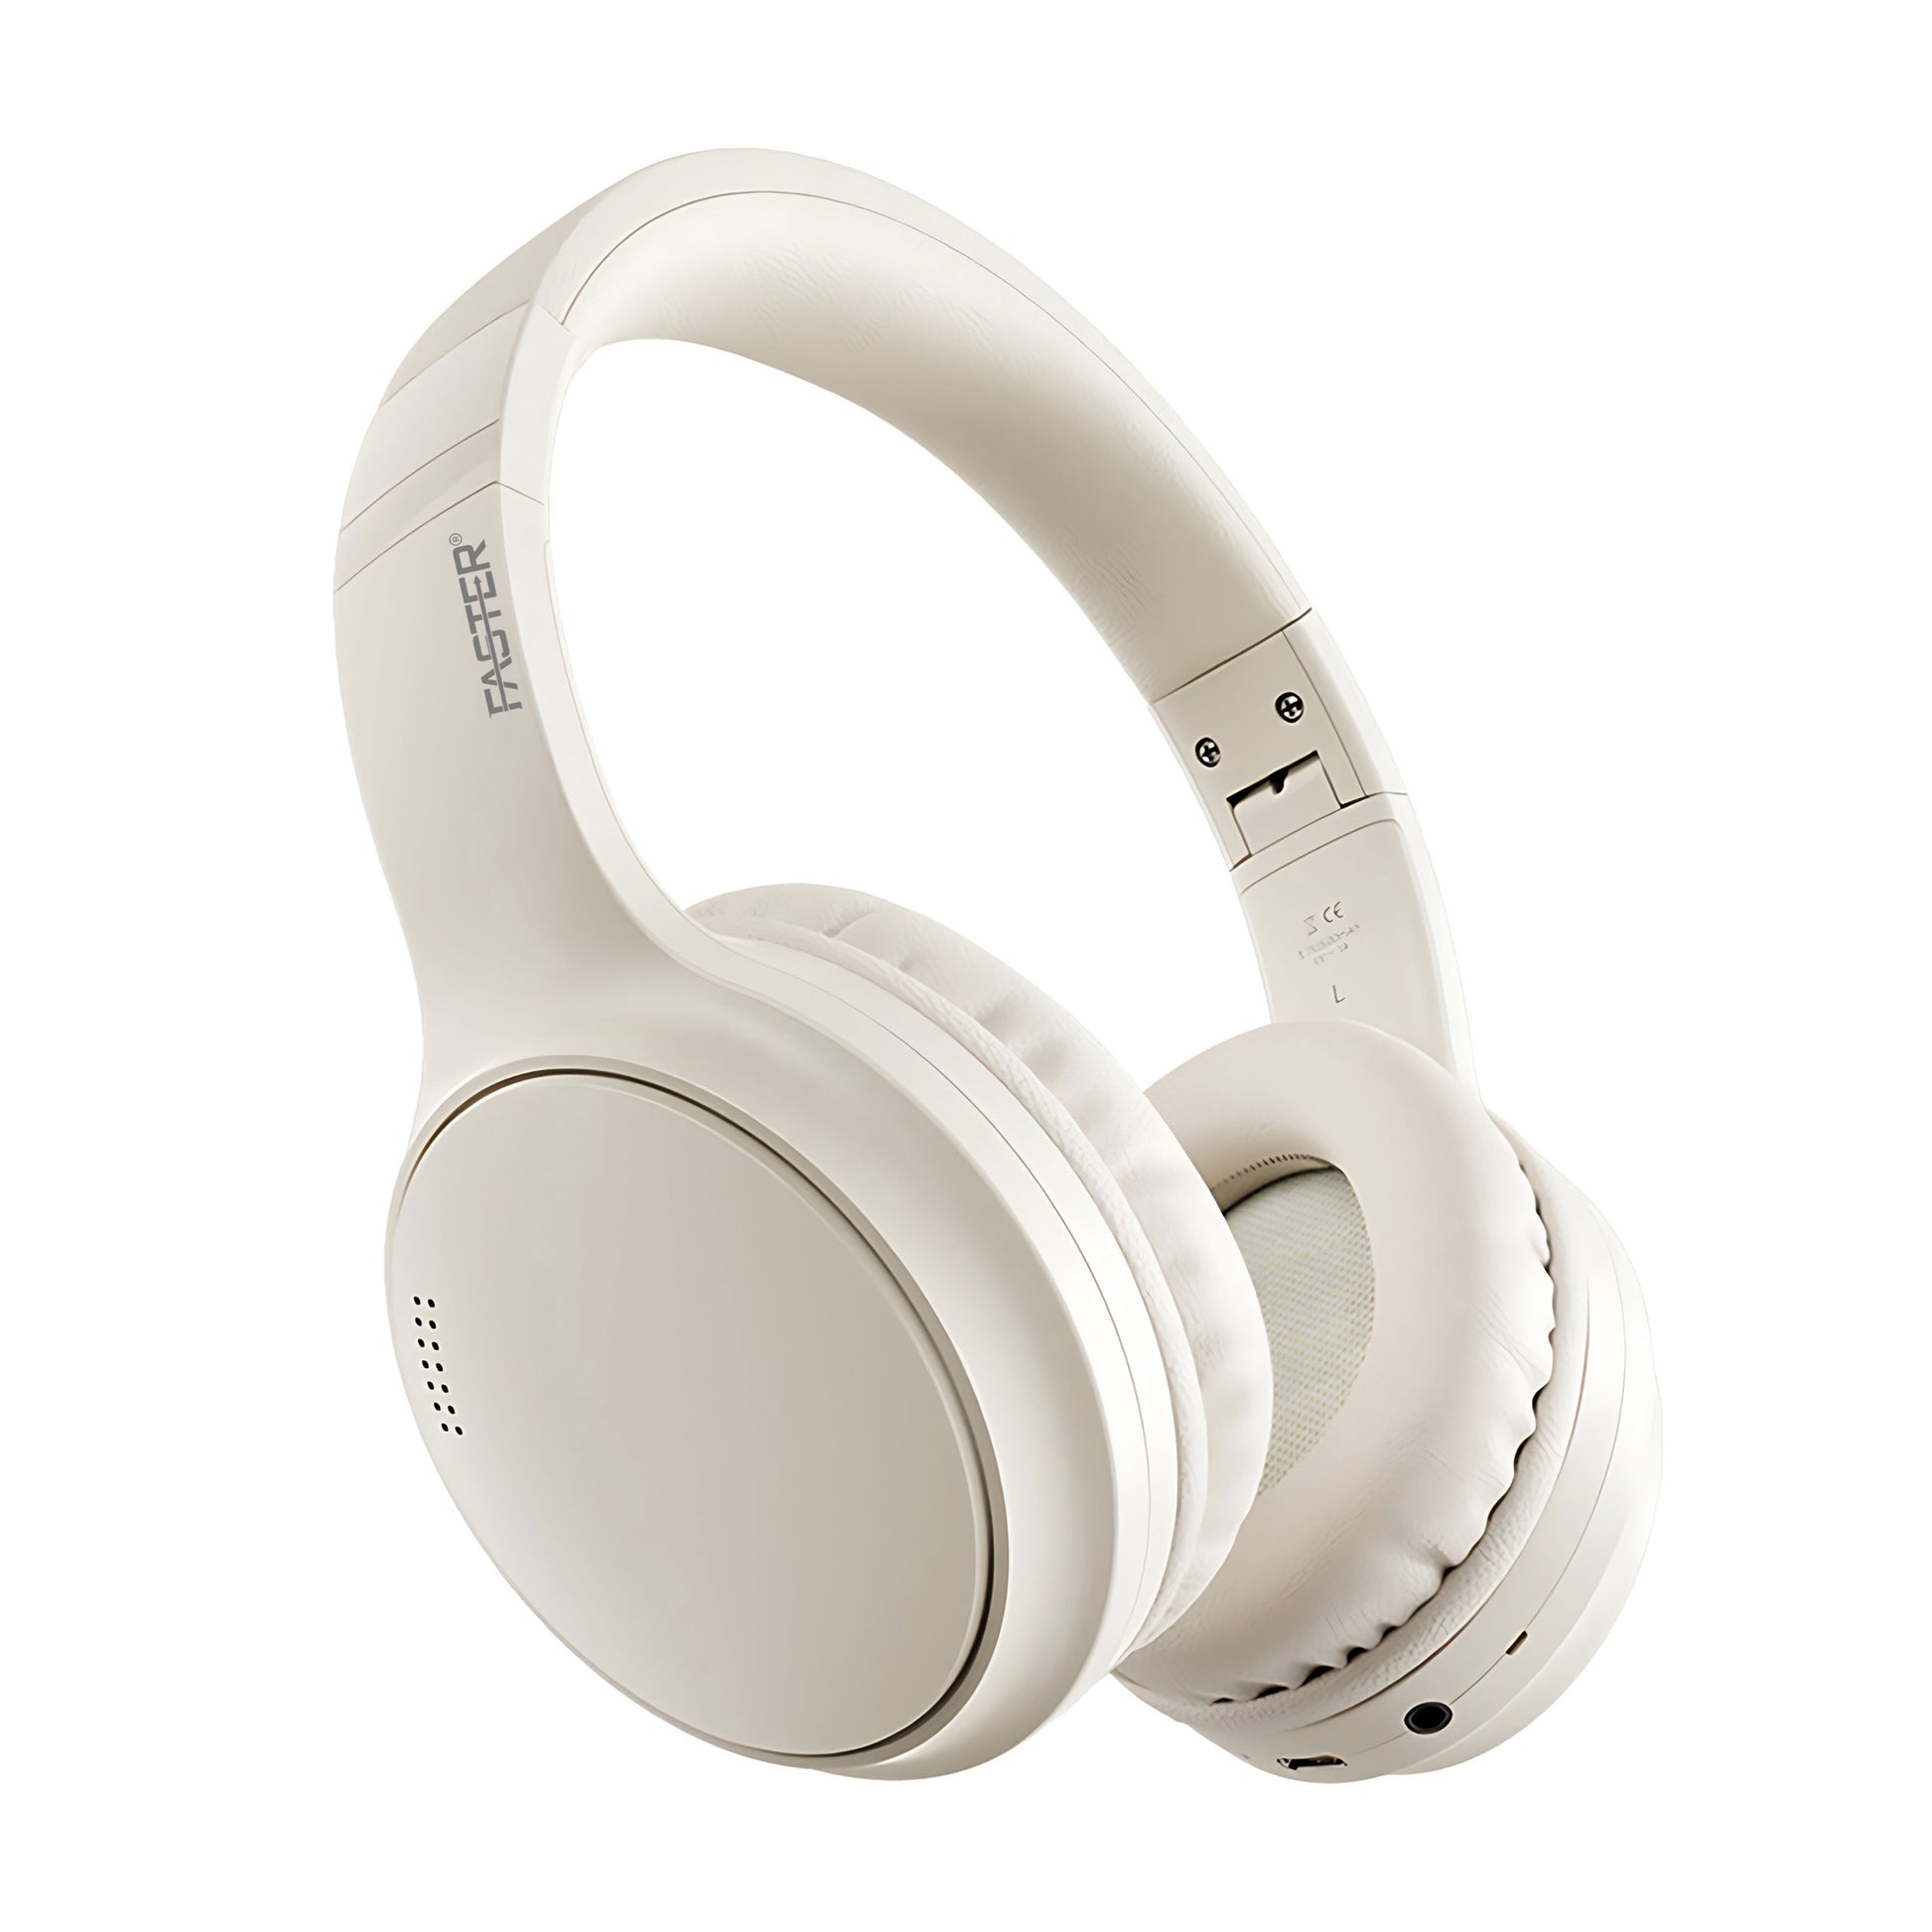 A Side view of Faster S5 offWhite Wireless headphonesA Side view of Faster S5 offWhite Wireless headphones